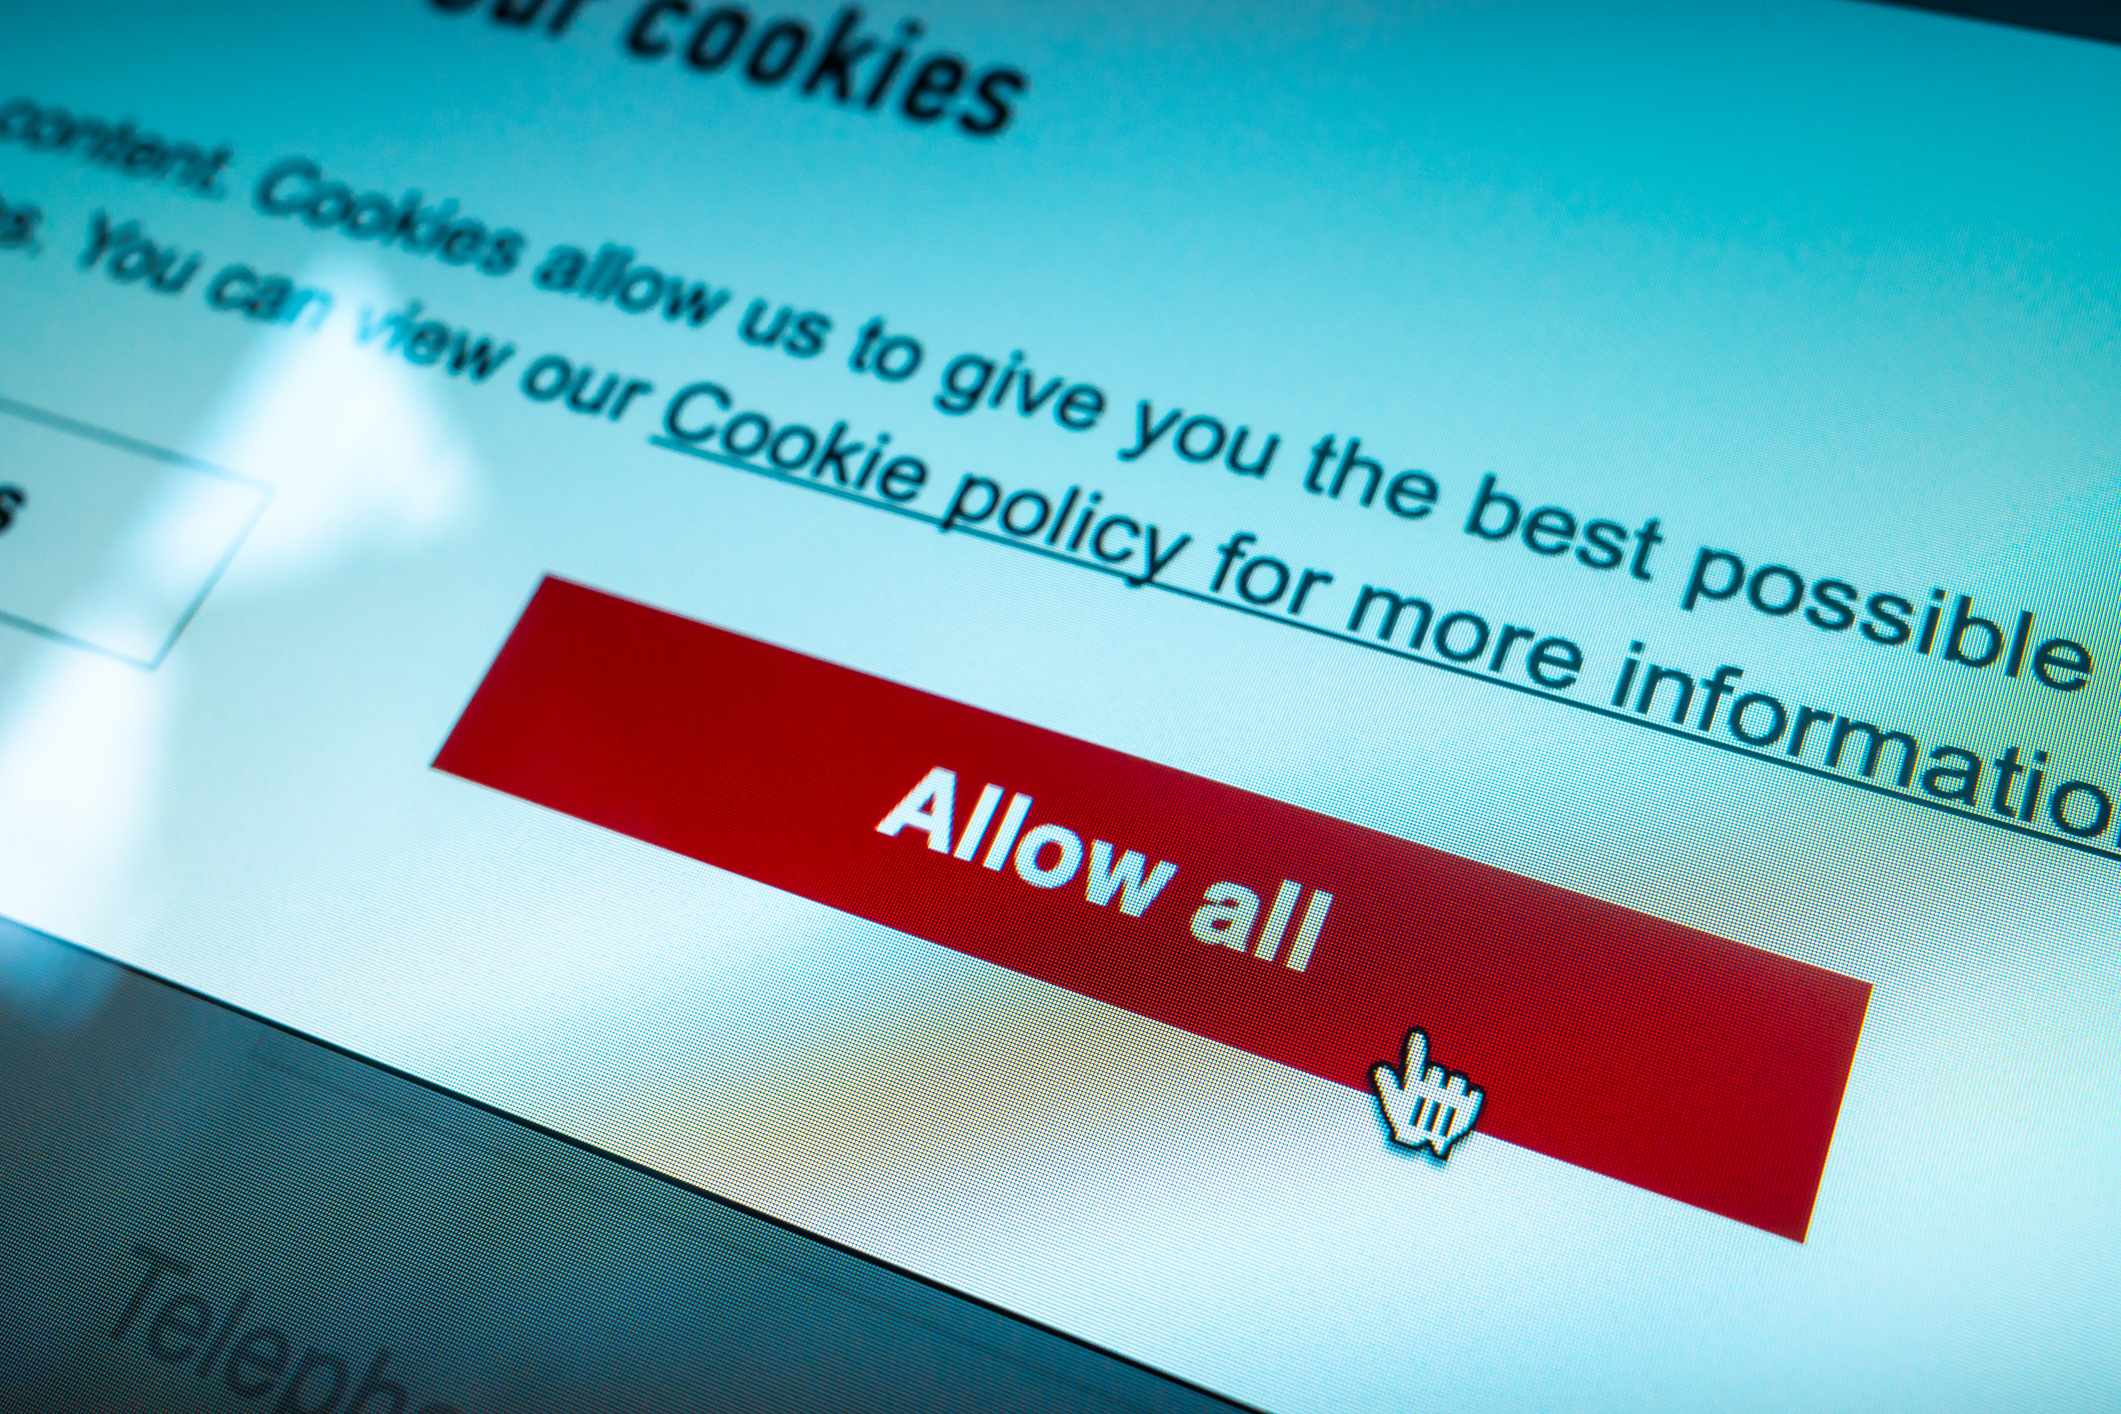 3rd party cookies are crumbling. Will your bank really miss them?